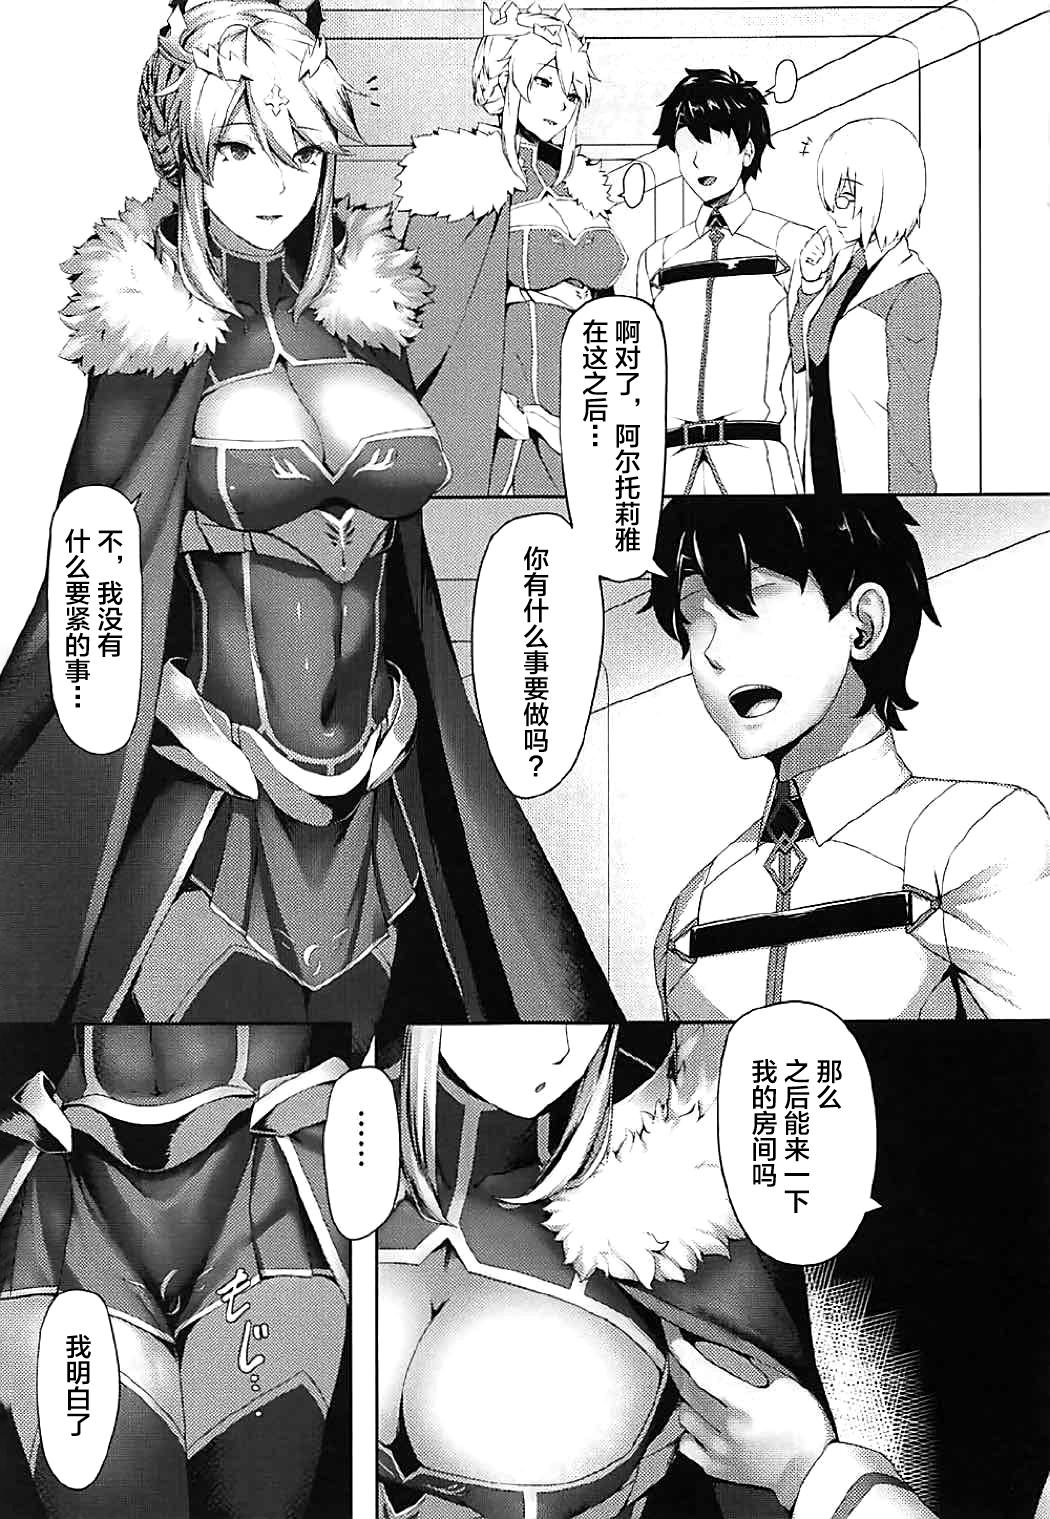 Amateurporn What do you like? - Fate grand order Cowgirl - Page 2